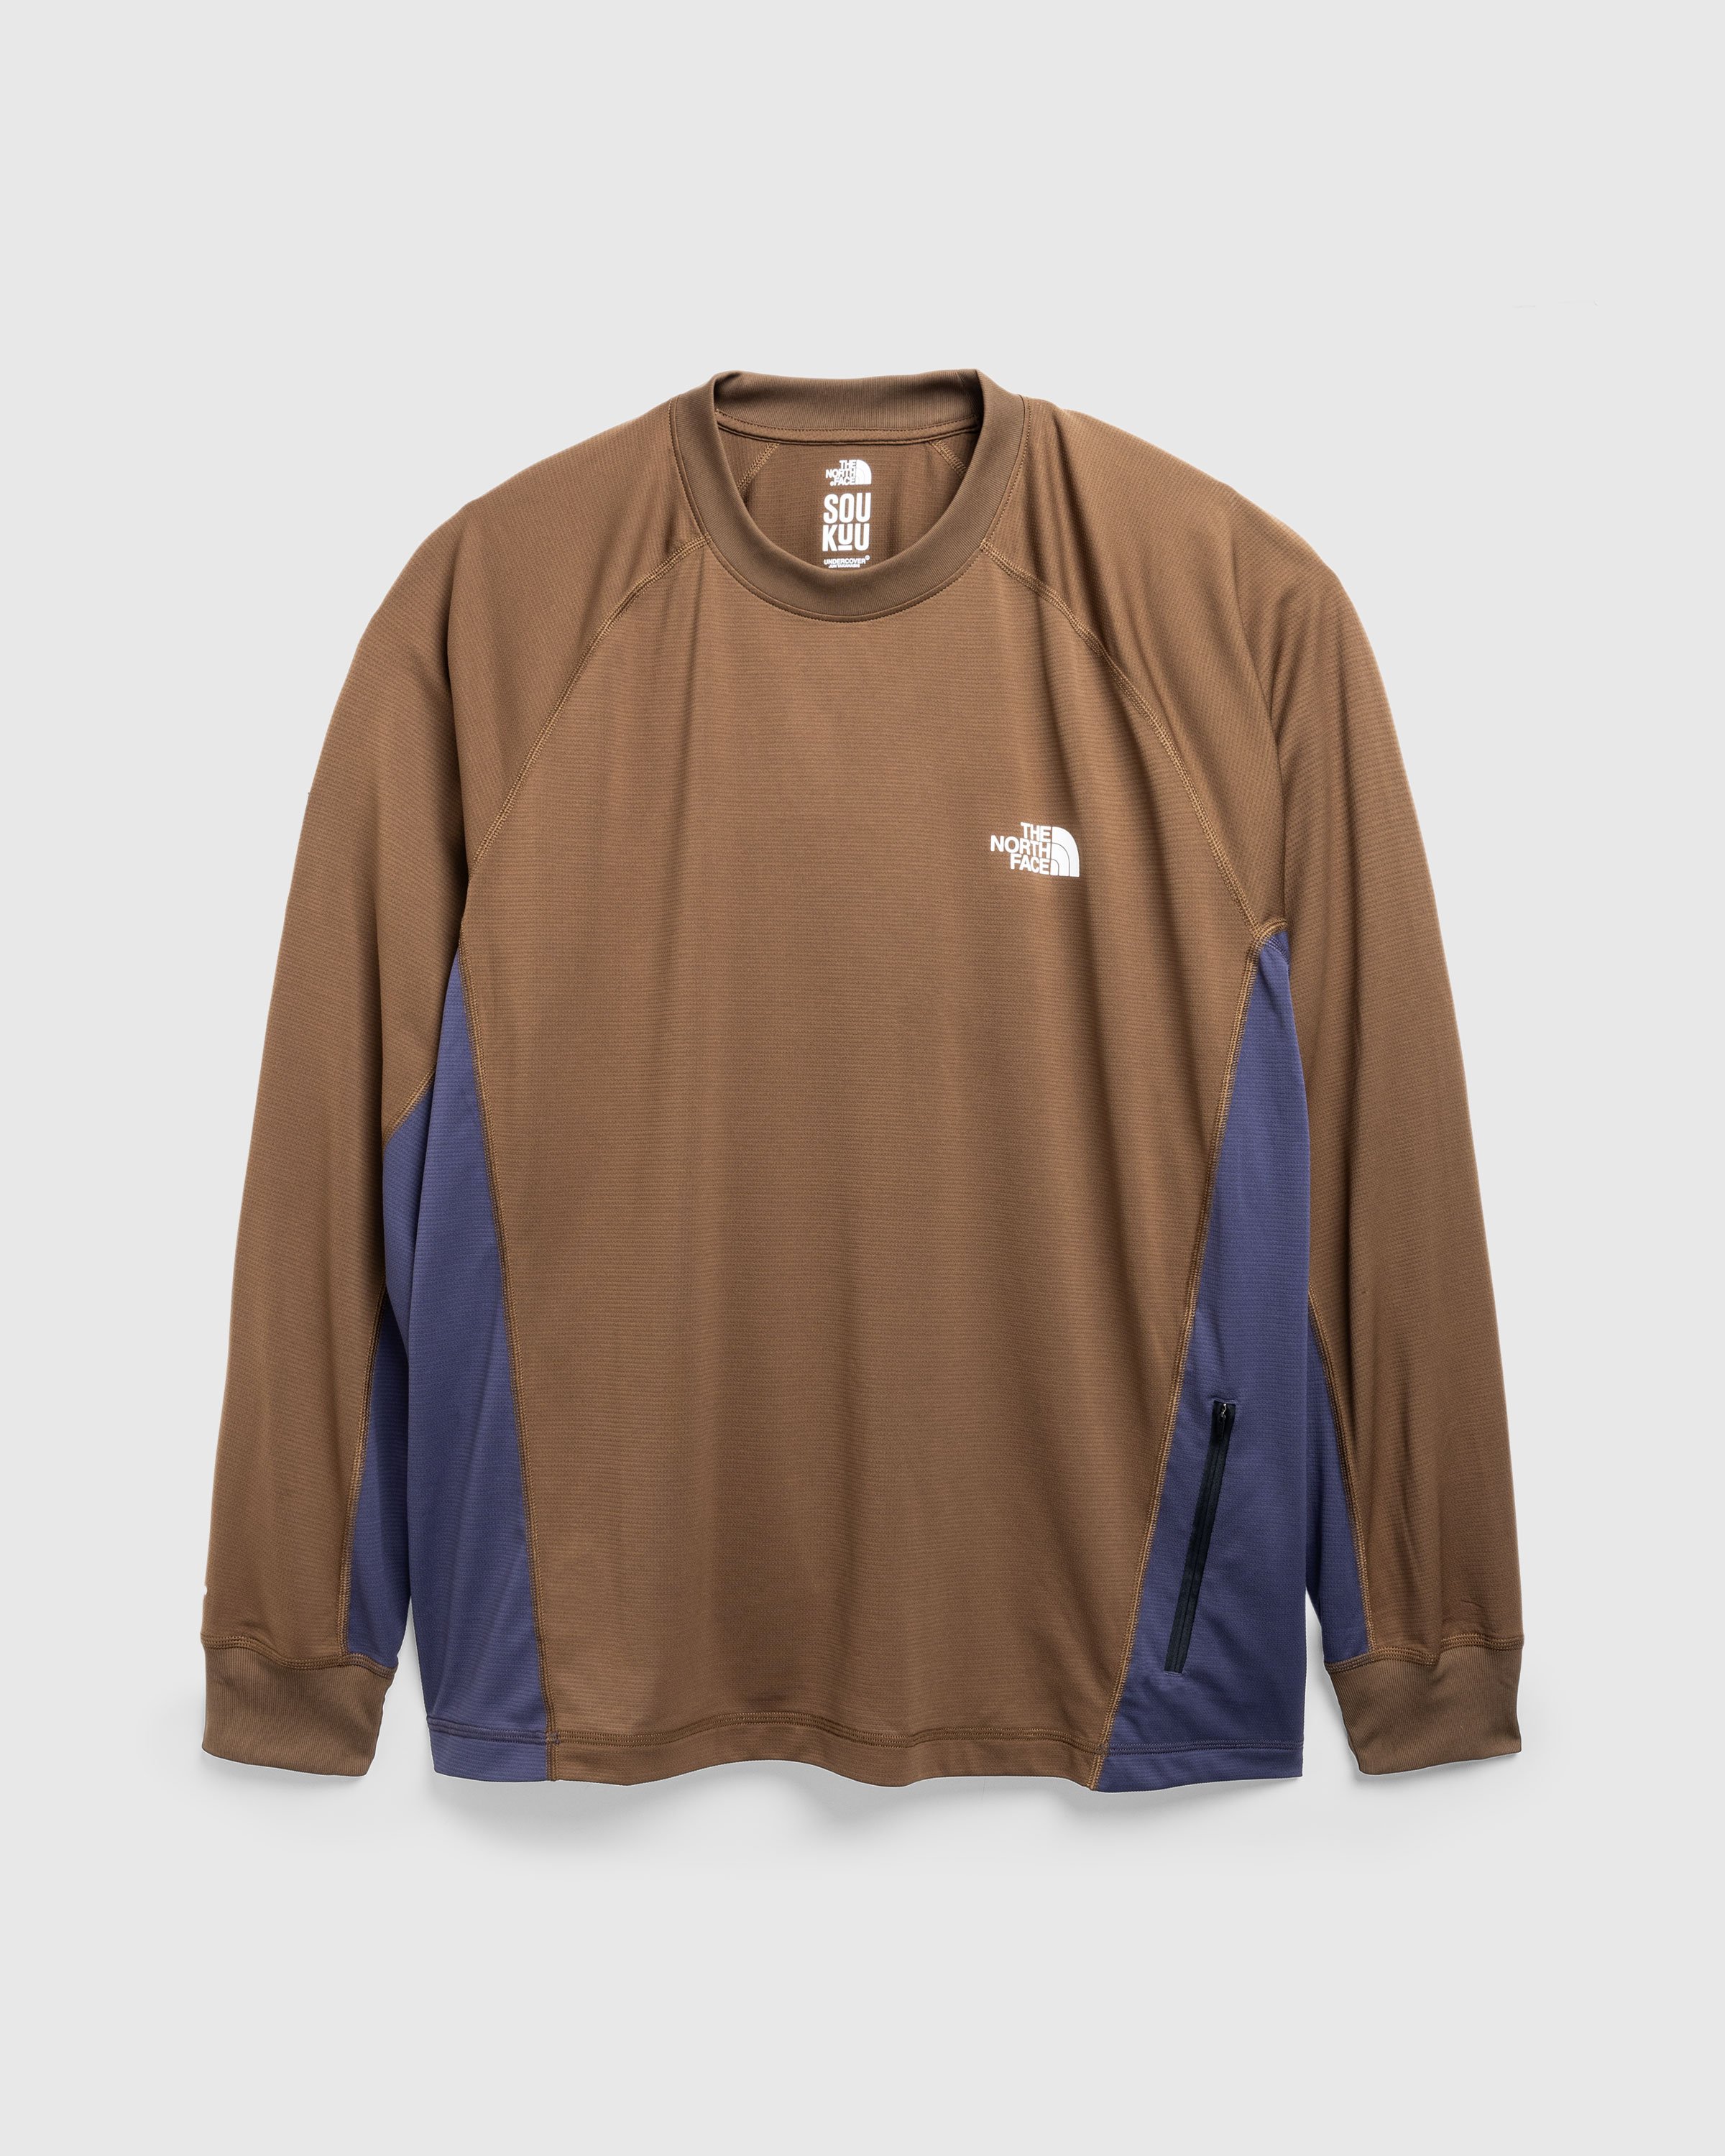 The North Face x UNDERCOVER - SOUKUU TRAIL RUN L/S TEE PERISCOPE GREY/DARK EAR - Clothing - Grey - Image 1